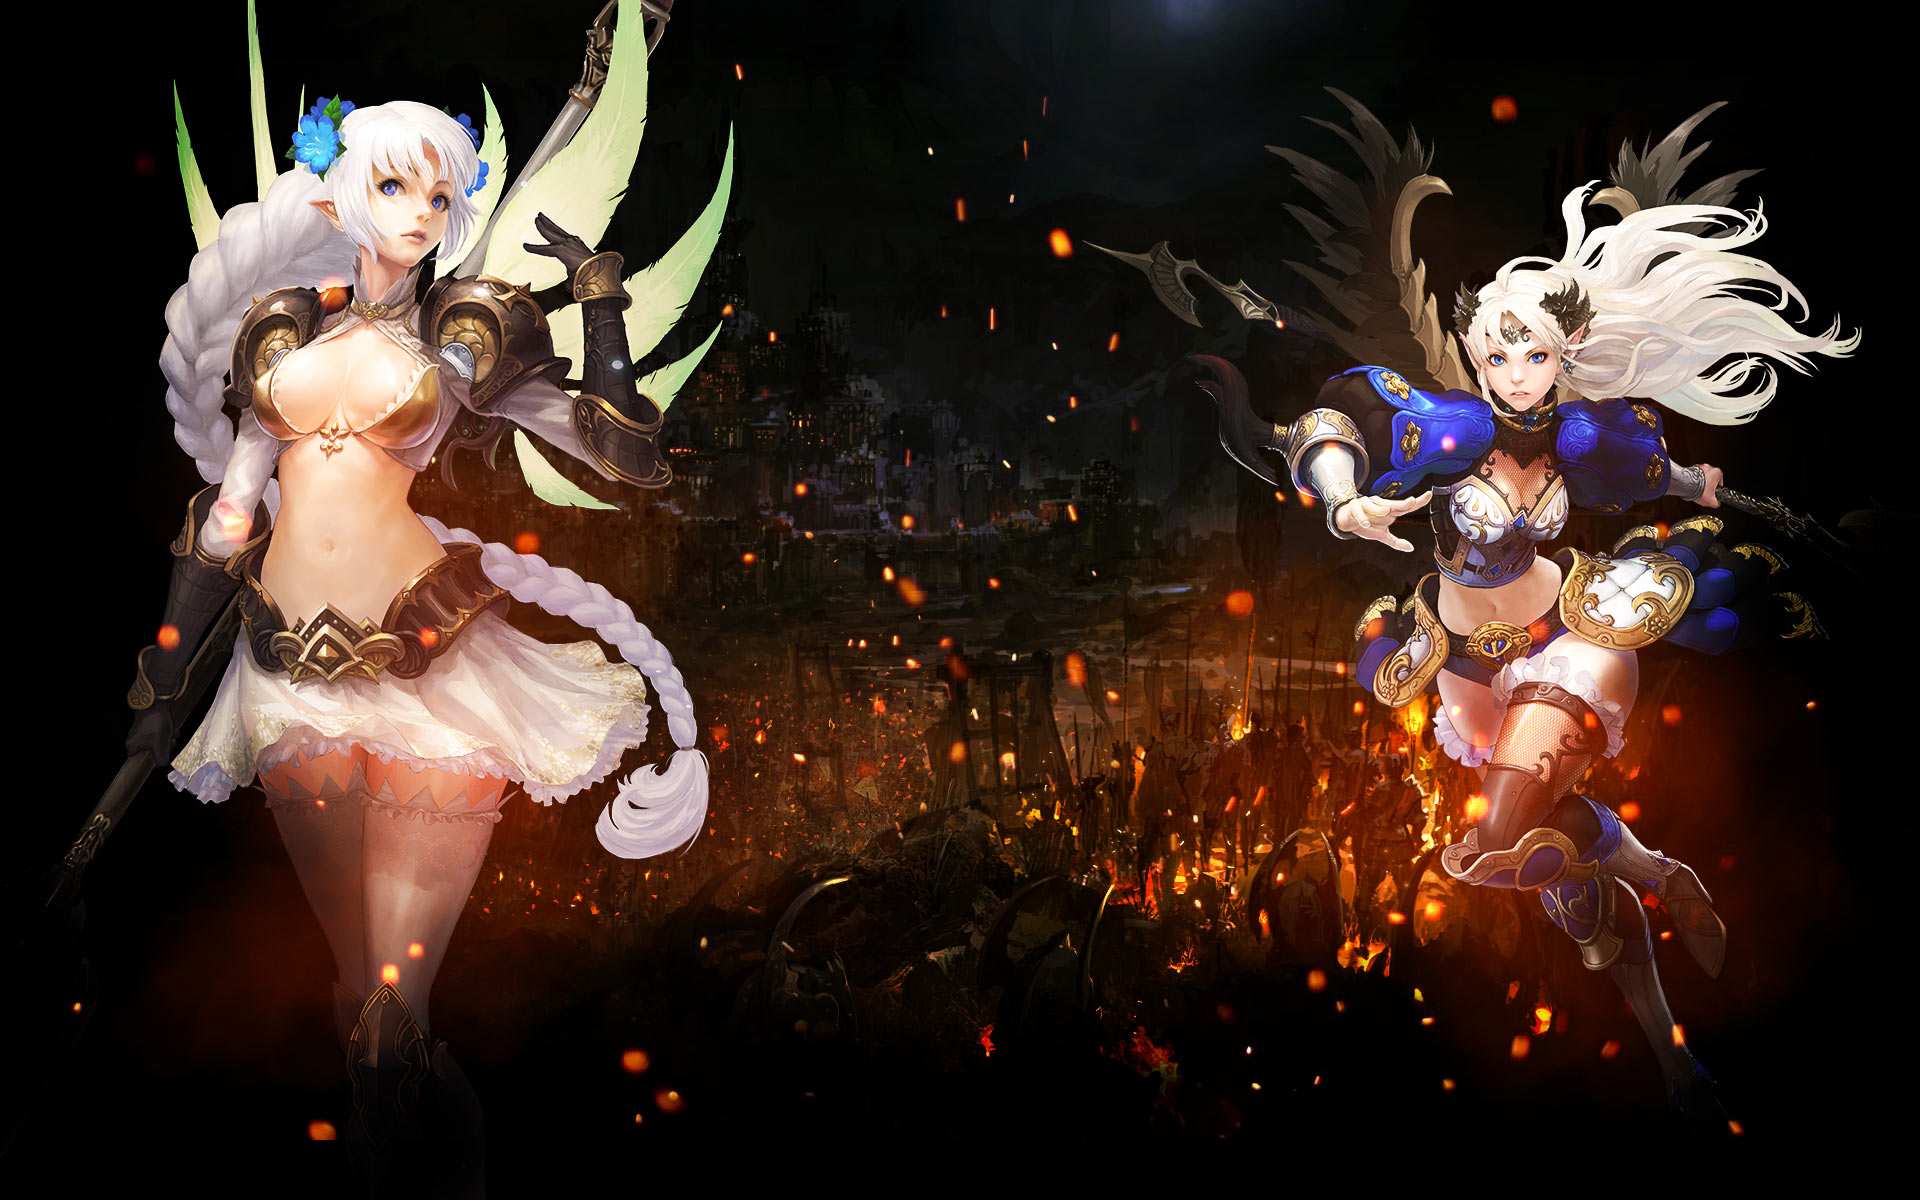 Anime 1920x1200 guardian girls anime girl with wings anime white hair Games Workshop